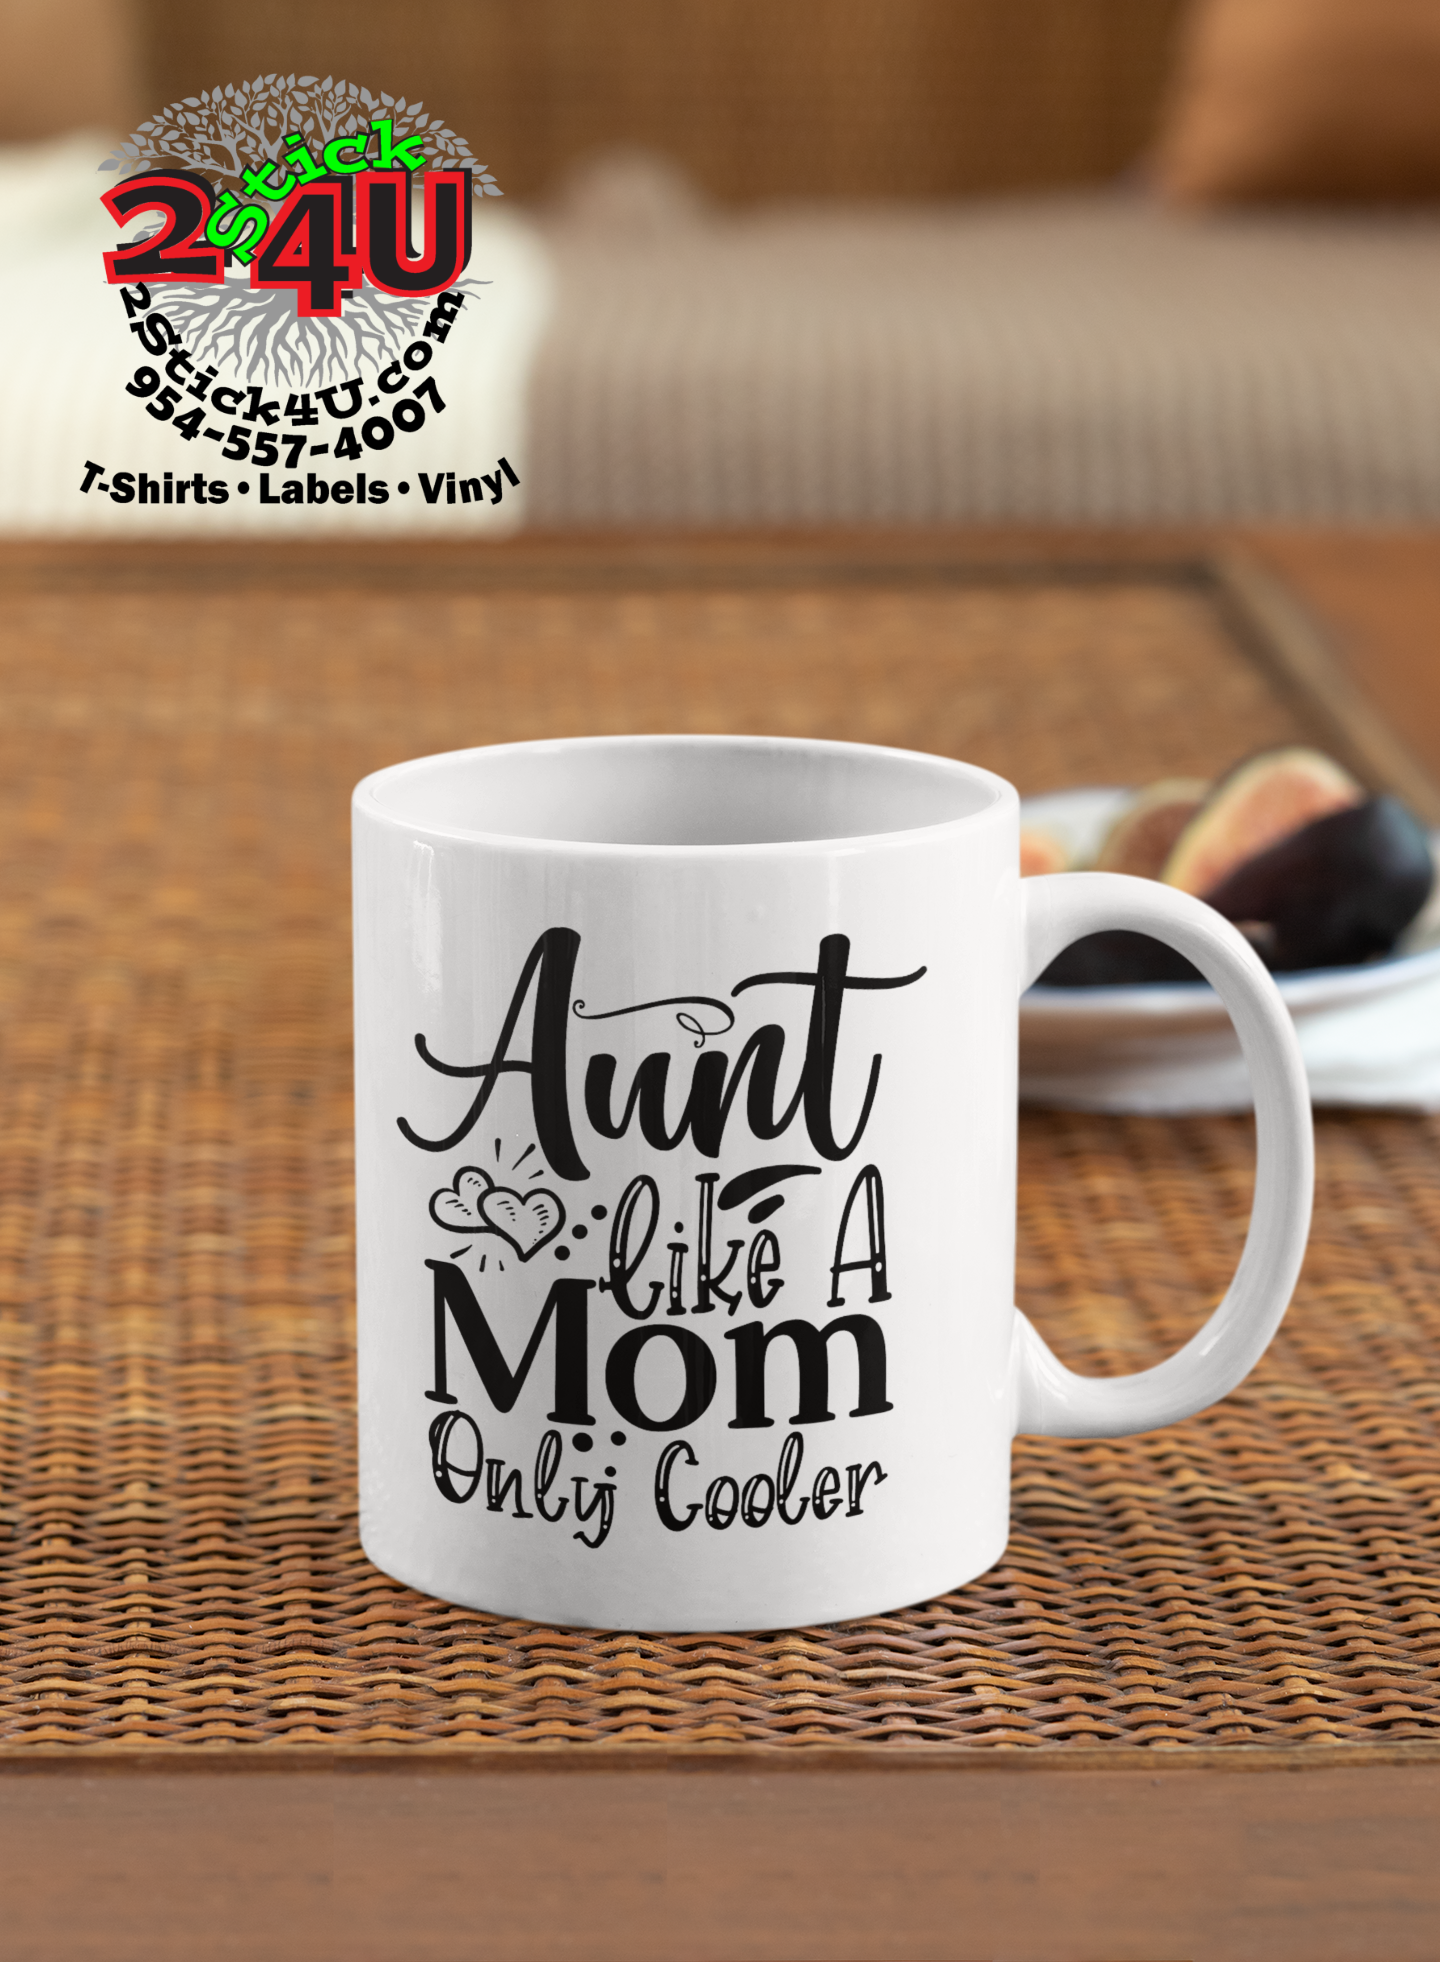 Aunt Like A Mom, Only Cooler! Coffee Mug - Home of Buy 3, Get 1 Free. –  2Stick4u